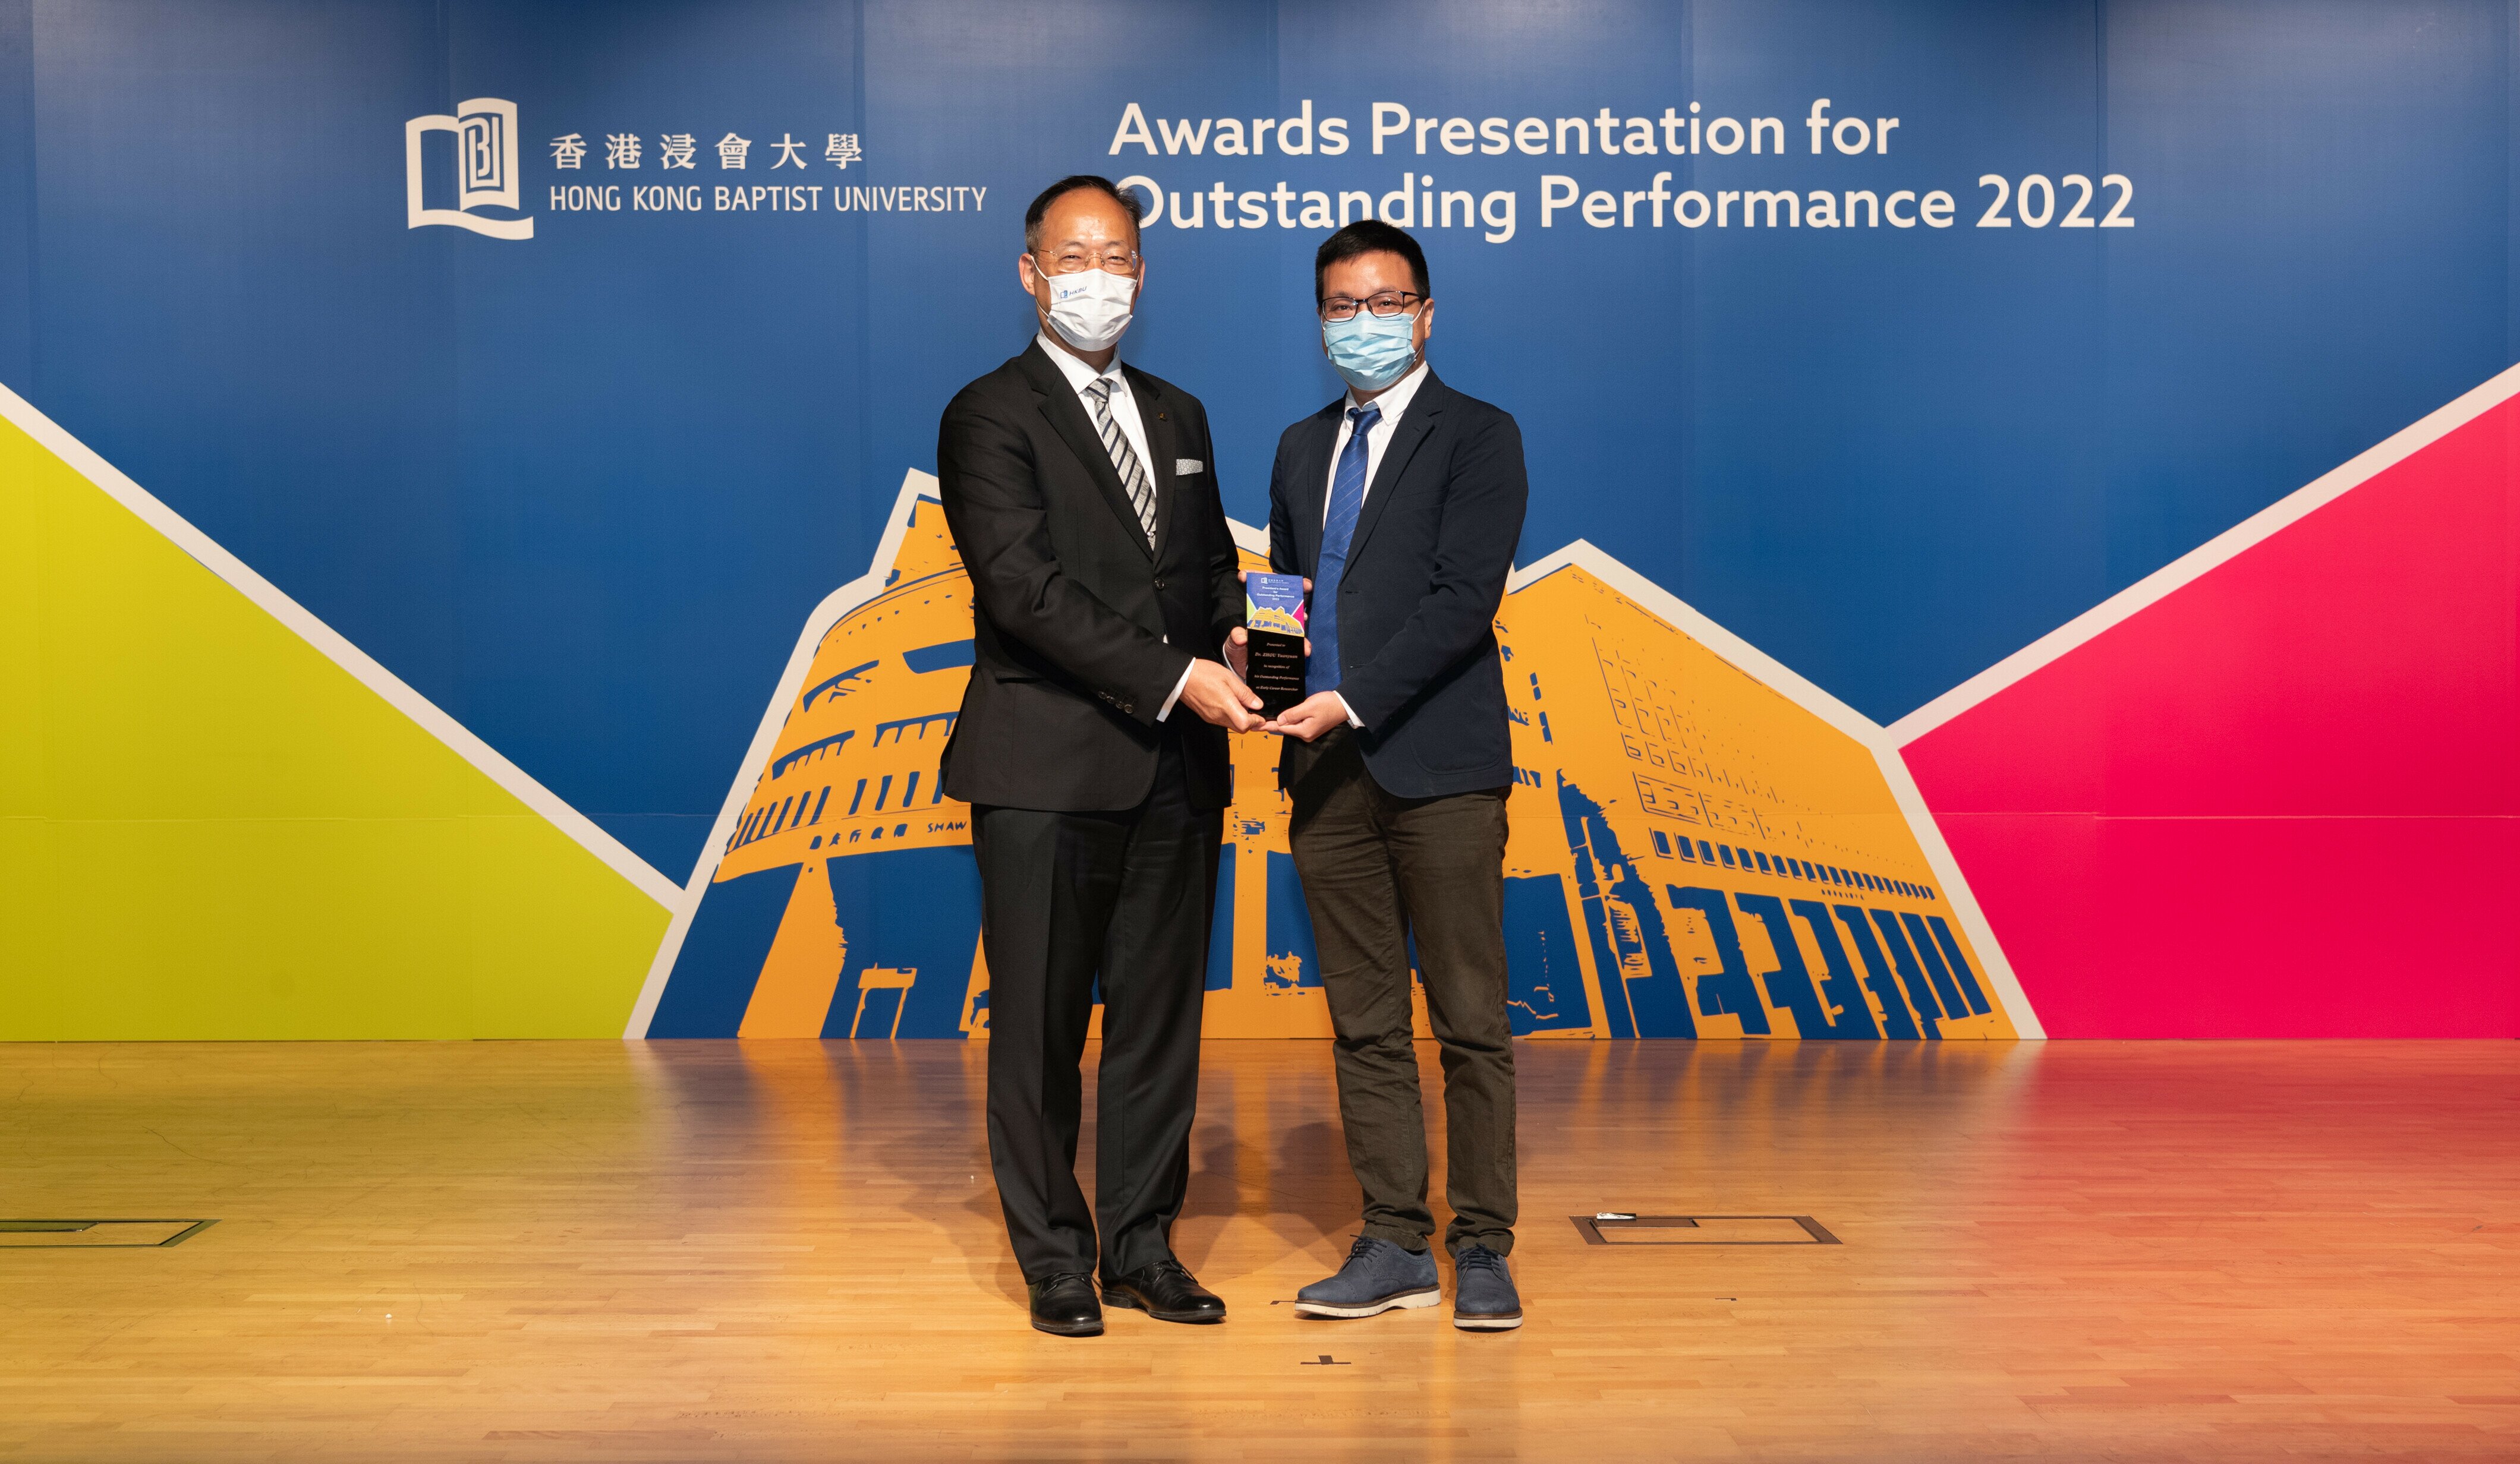 Assistant Professor ZHOU Yuanyuan was presented with President’s Award for Outstanding Performance as Early Career Researcher